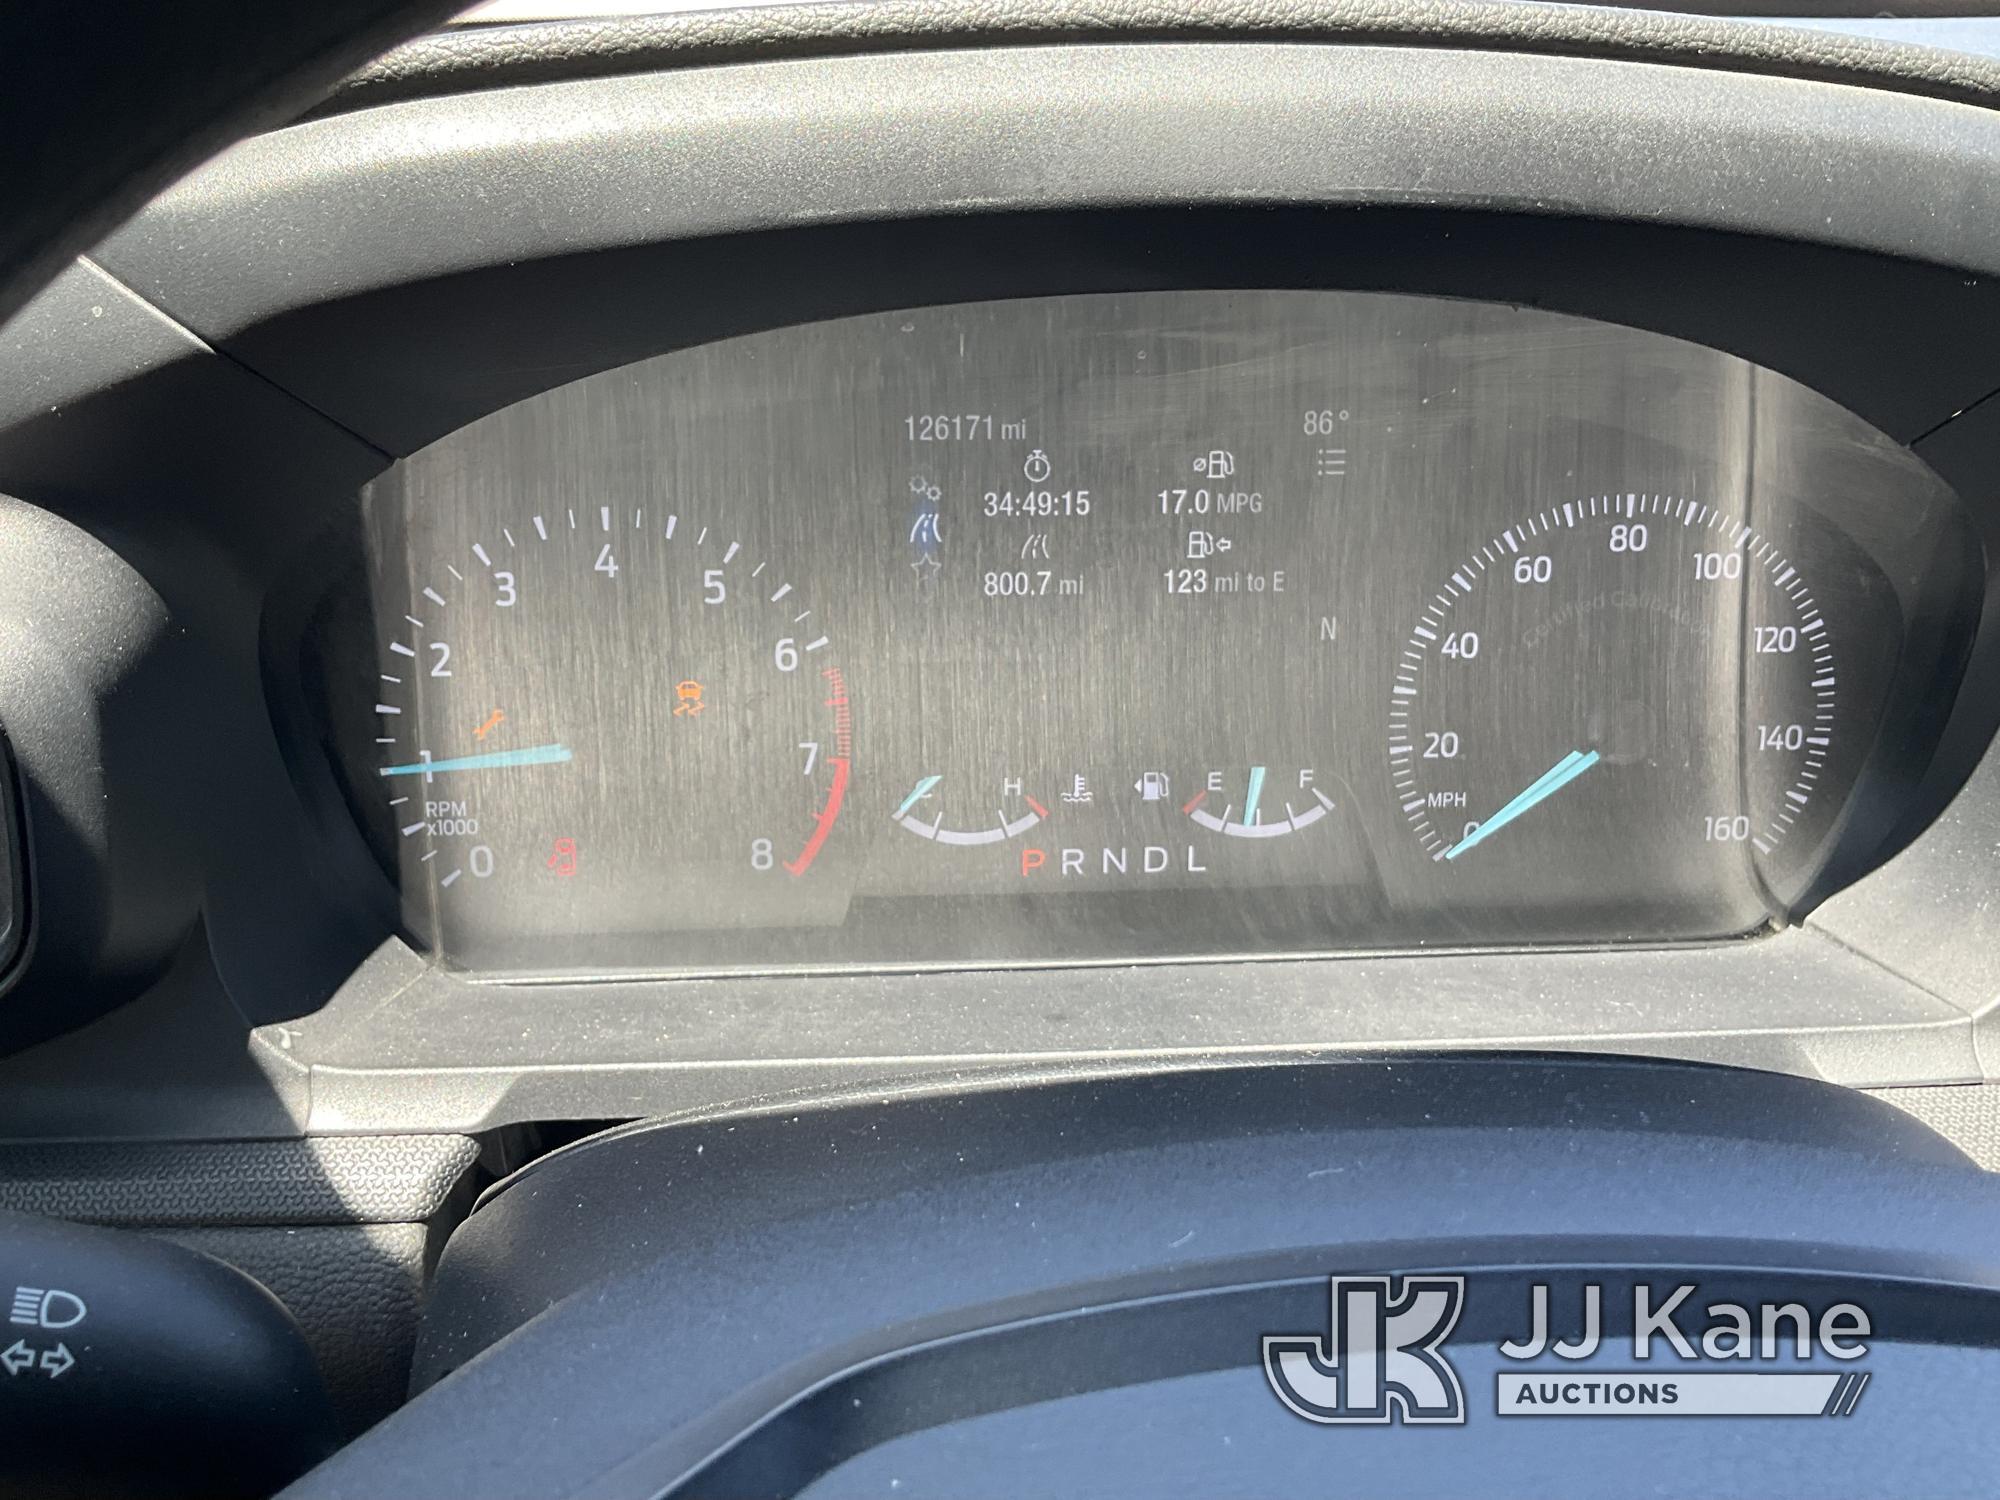 (Las Vegas, NV) 2020 Ford Explorer AWD Police Interceptor No Console Check Engine Light On, Traction